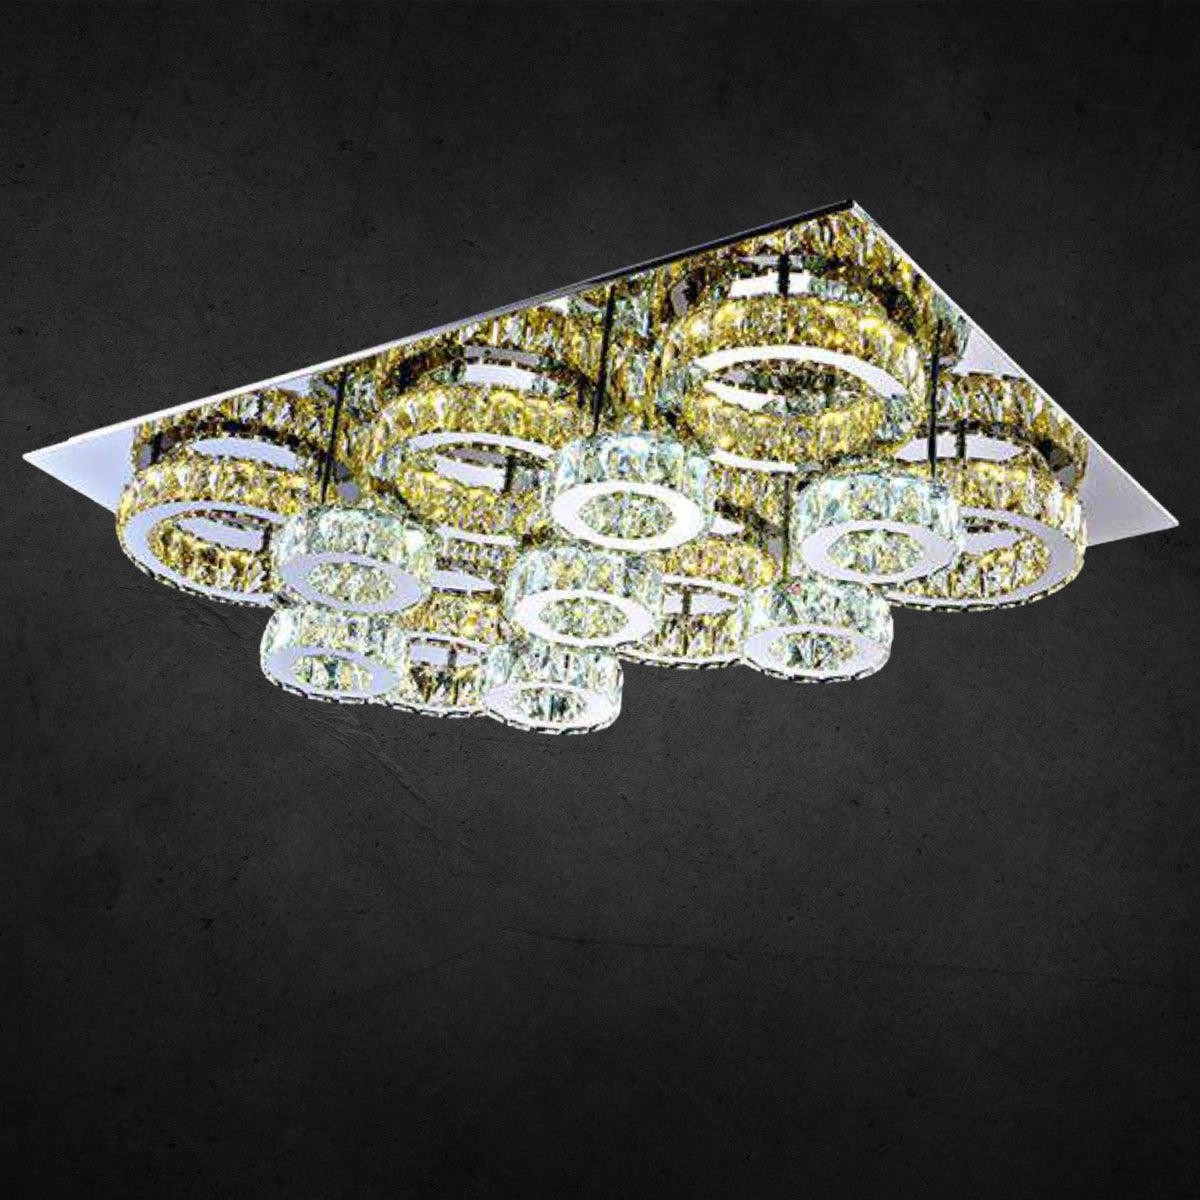 Charlotte-chandeliers-large